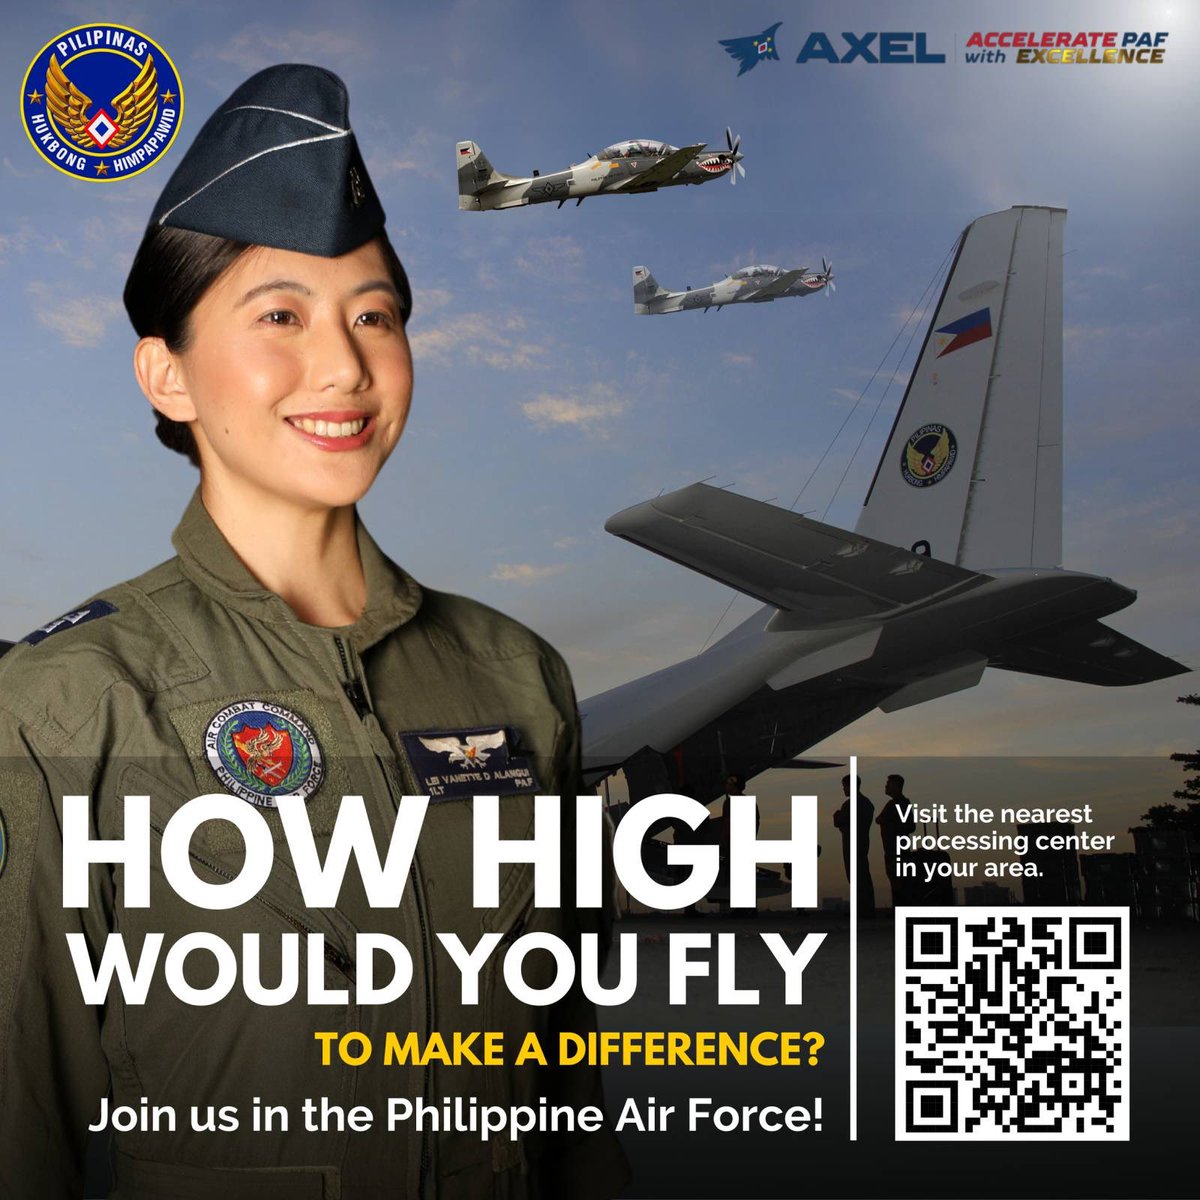 How high would you fly to protect our country? Step up to the challenge of reaching new heights in safeguarding our skies with unwavering resolve and indomitable spirit. 

For more details, kindly visit this link: 
me-qr.com/OAAskkJr